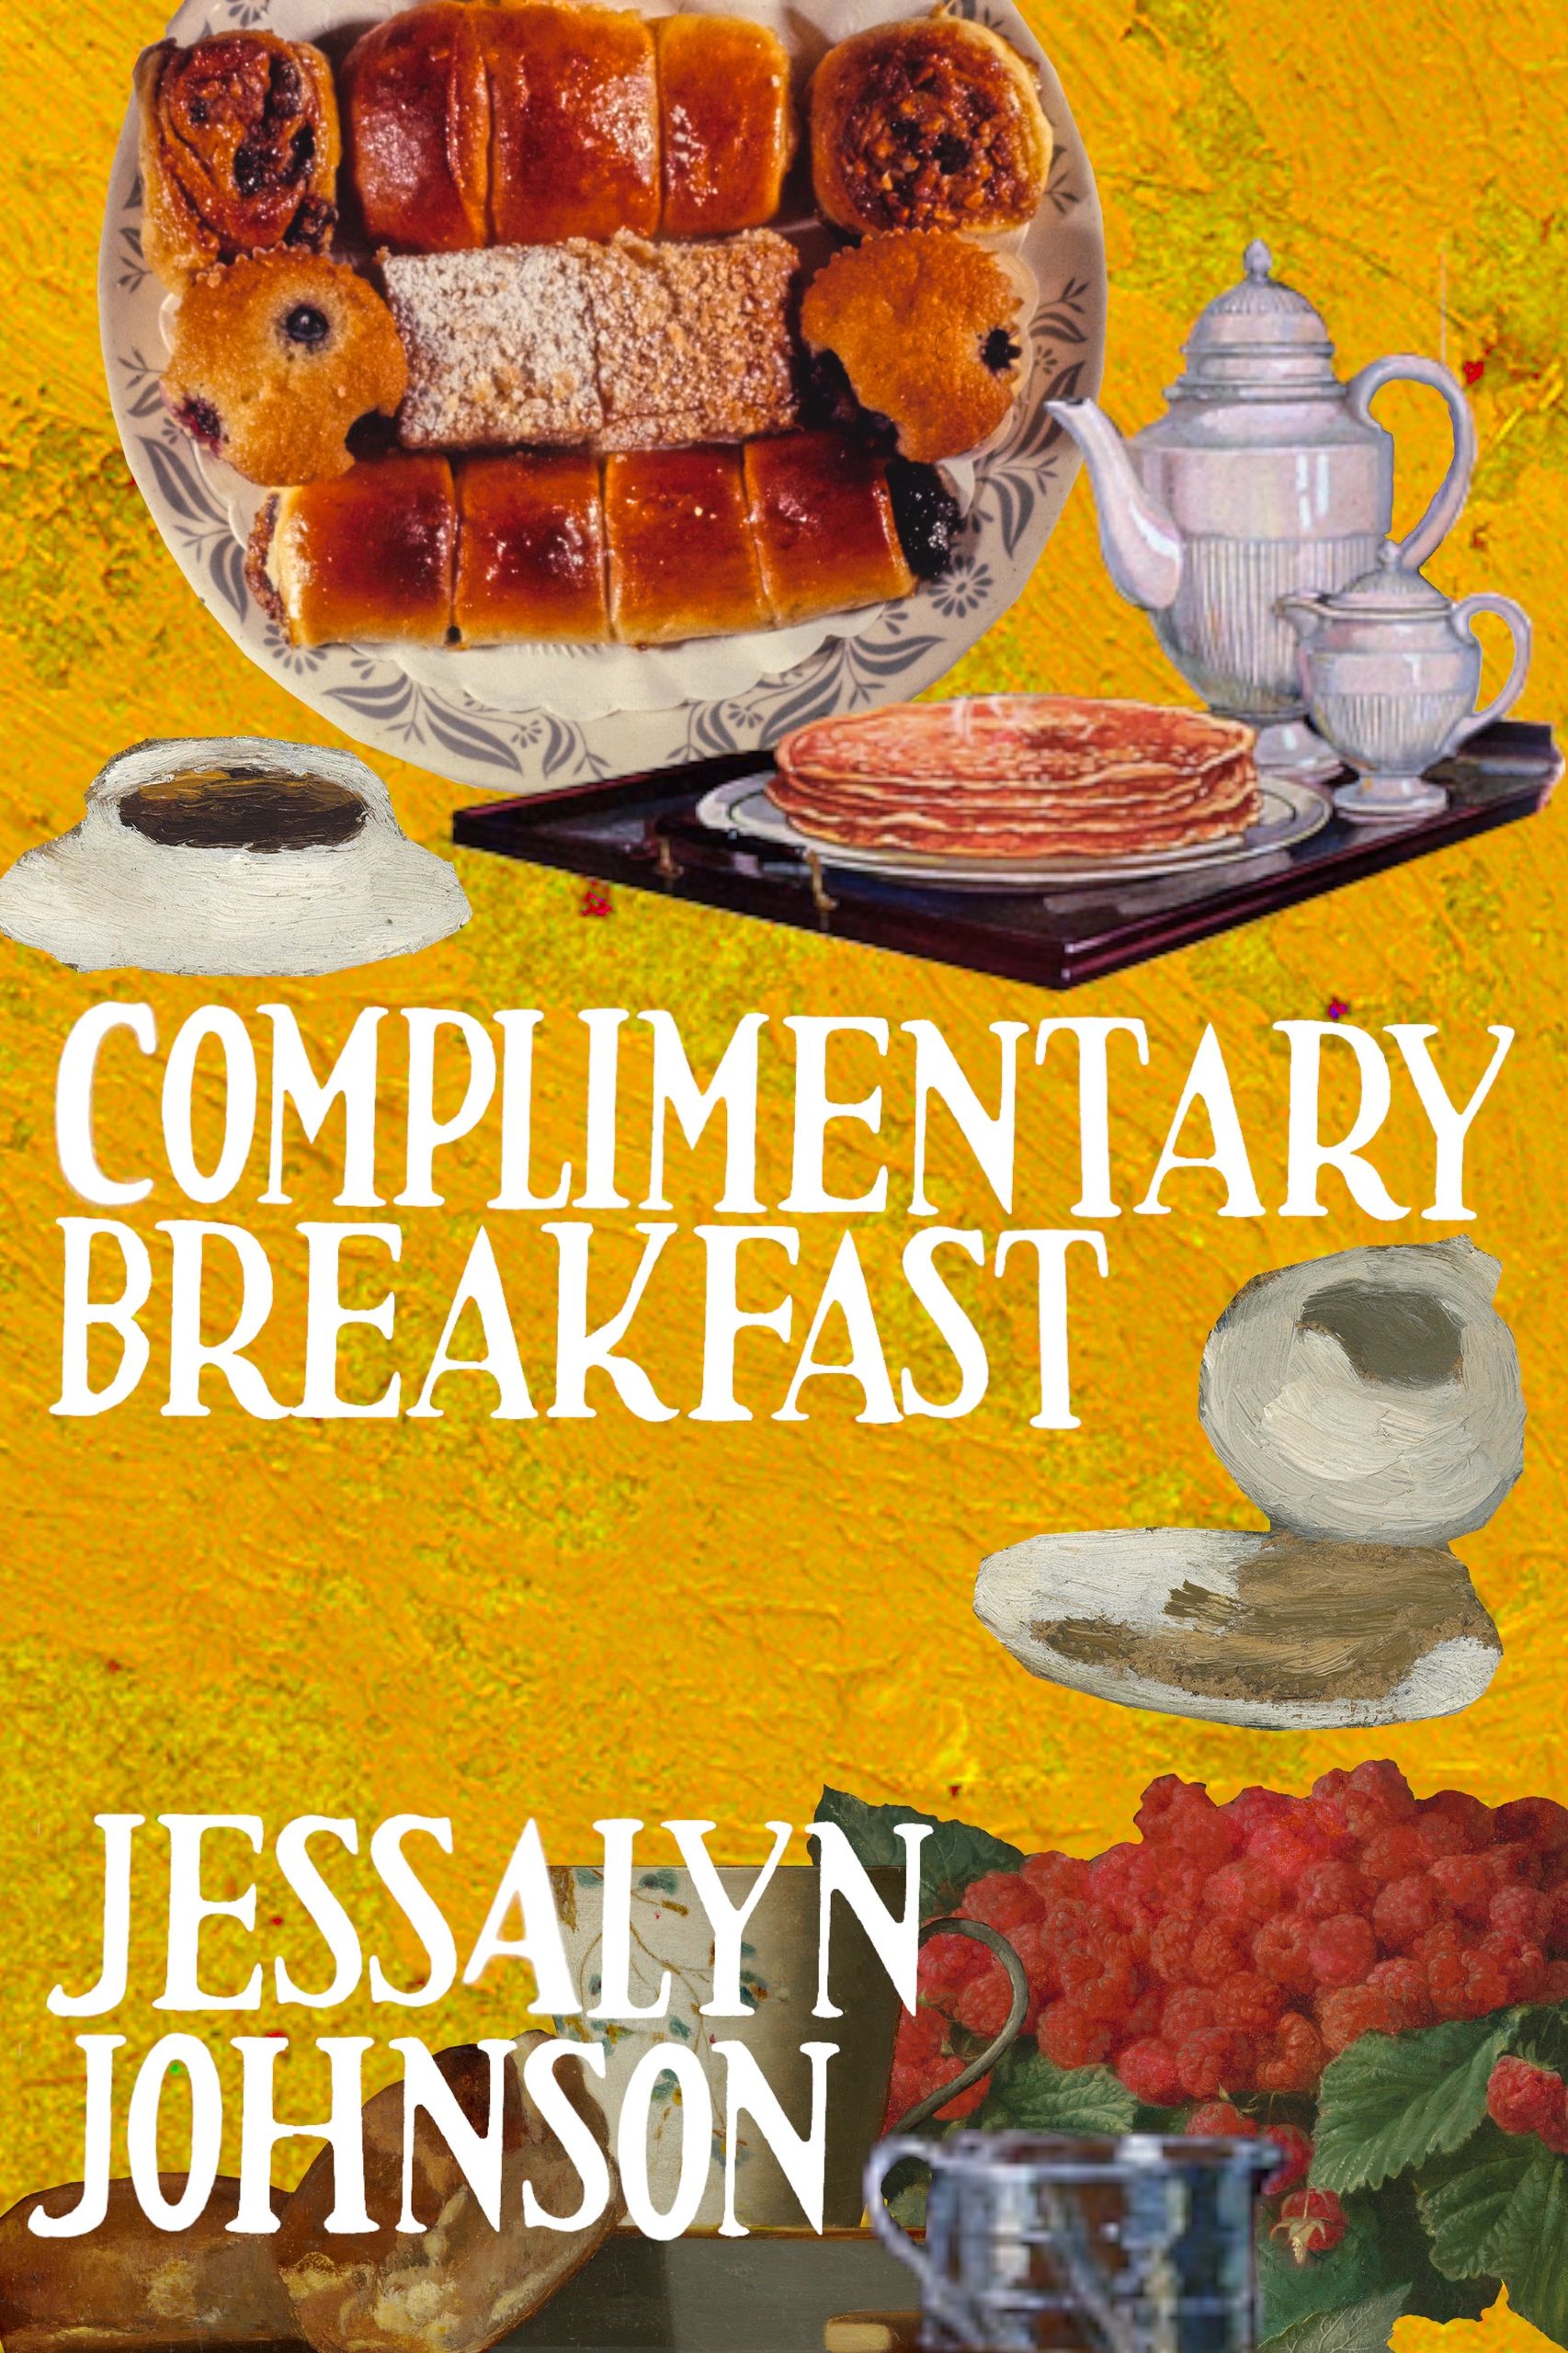 Complimentary Breakfast is a poetry chapbook by Jessalyn Johnson available via Bottlecap Press. 